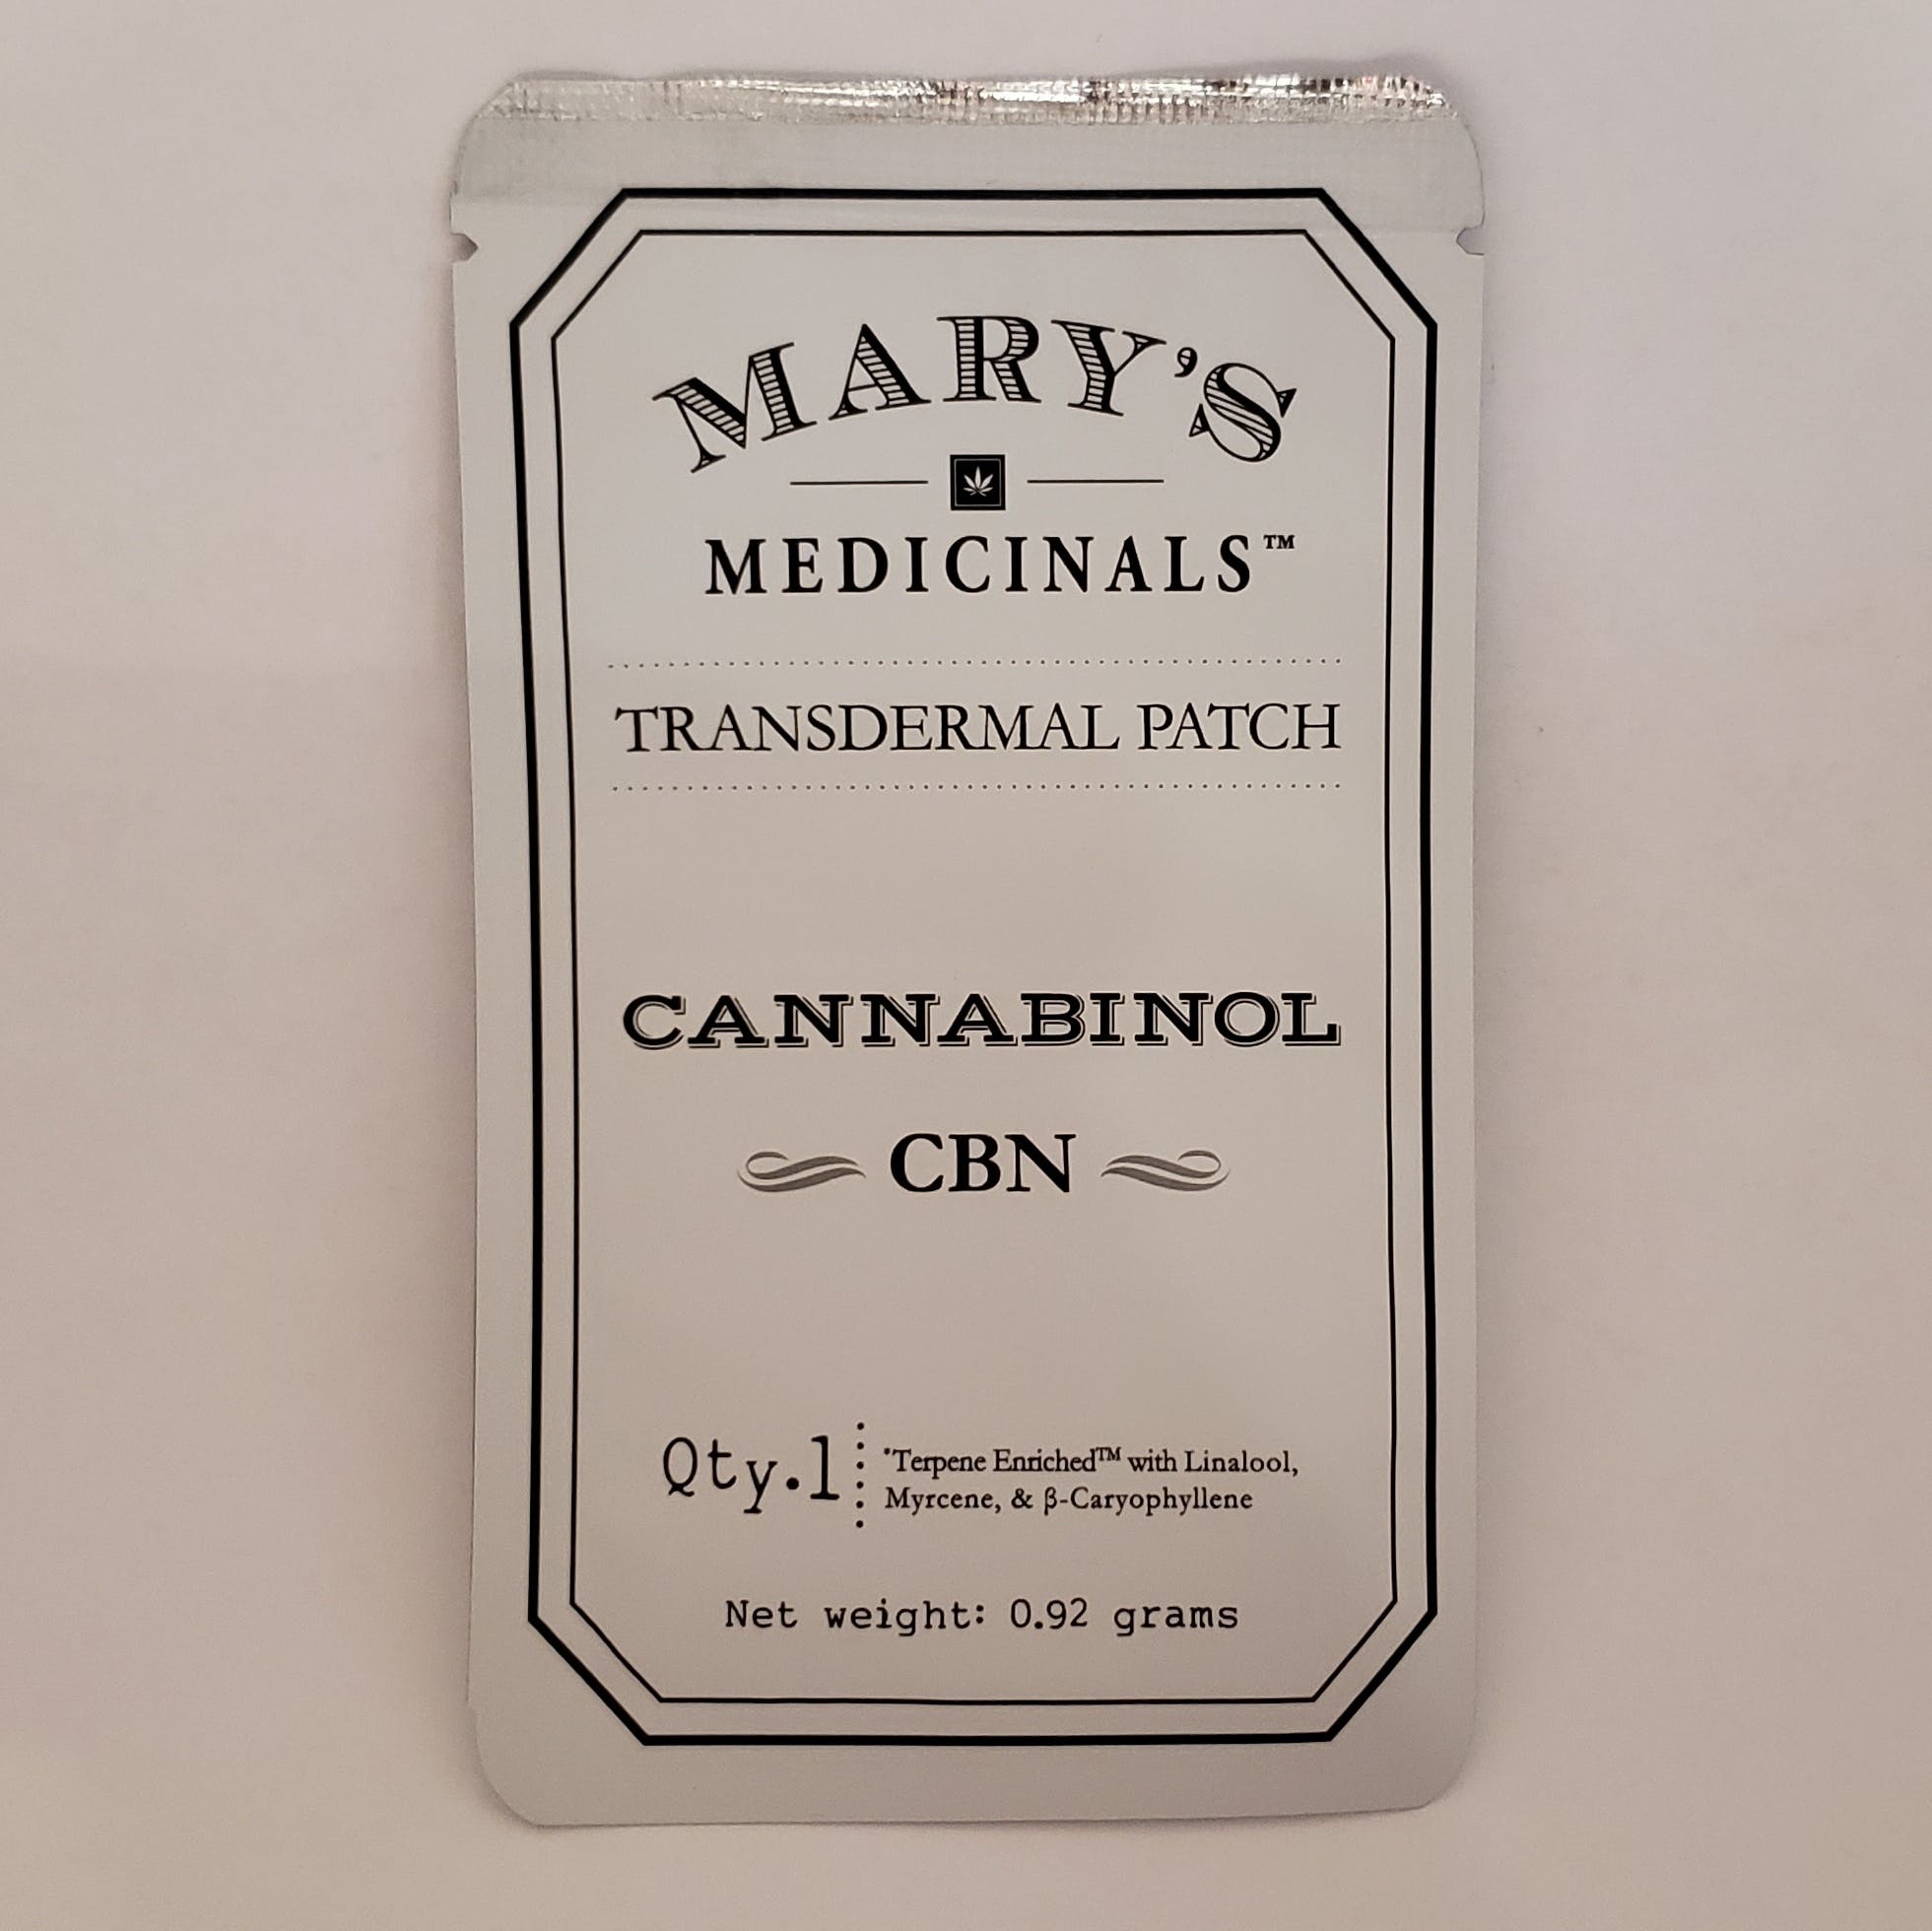 Mary's Medicinal's: CBN 10mg Patch